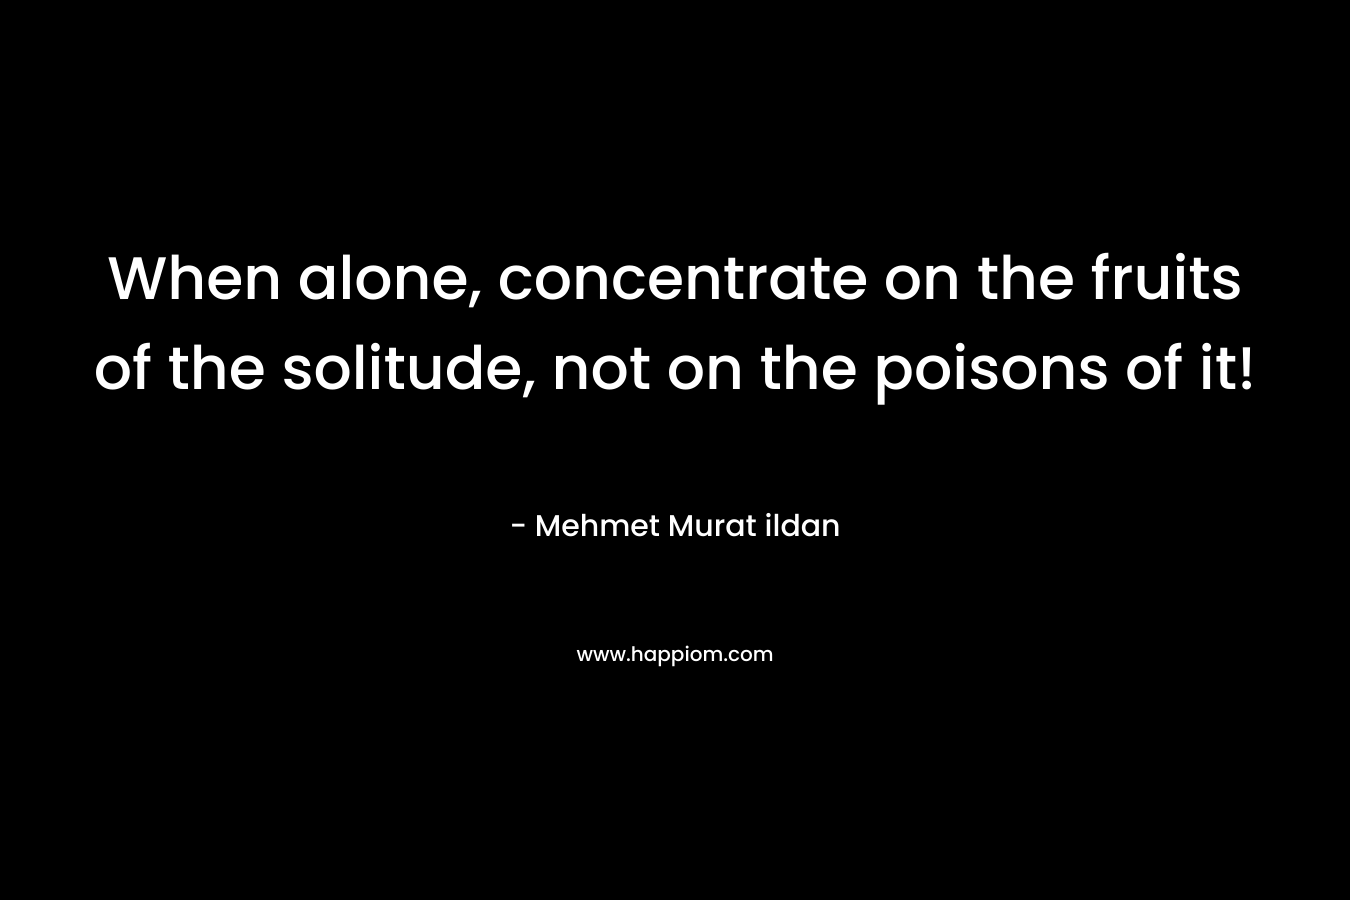 When alone, concentrate on the fruits of the solitude, not on the poisons of it! – Mehmet Murat ildan